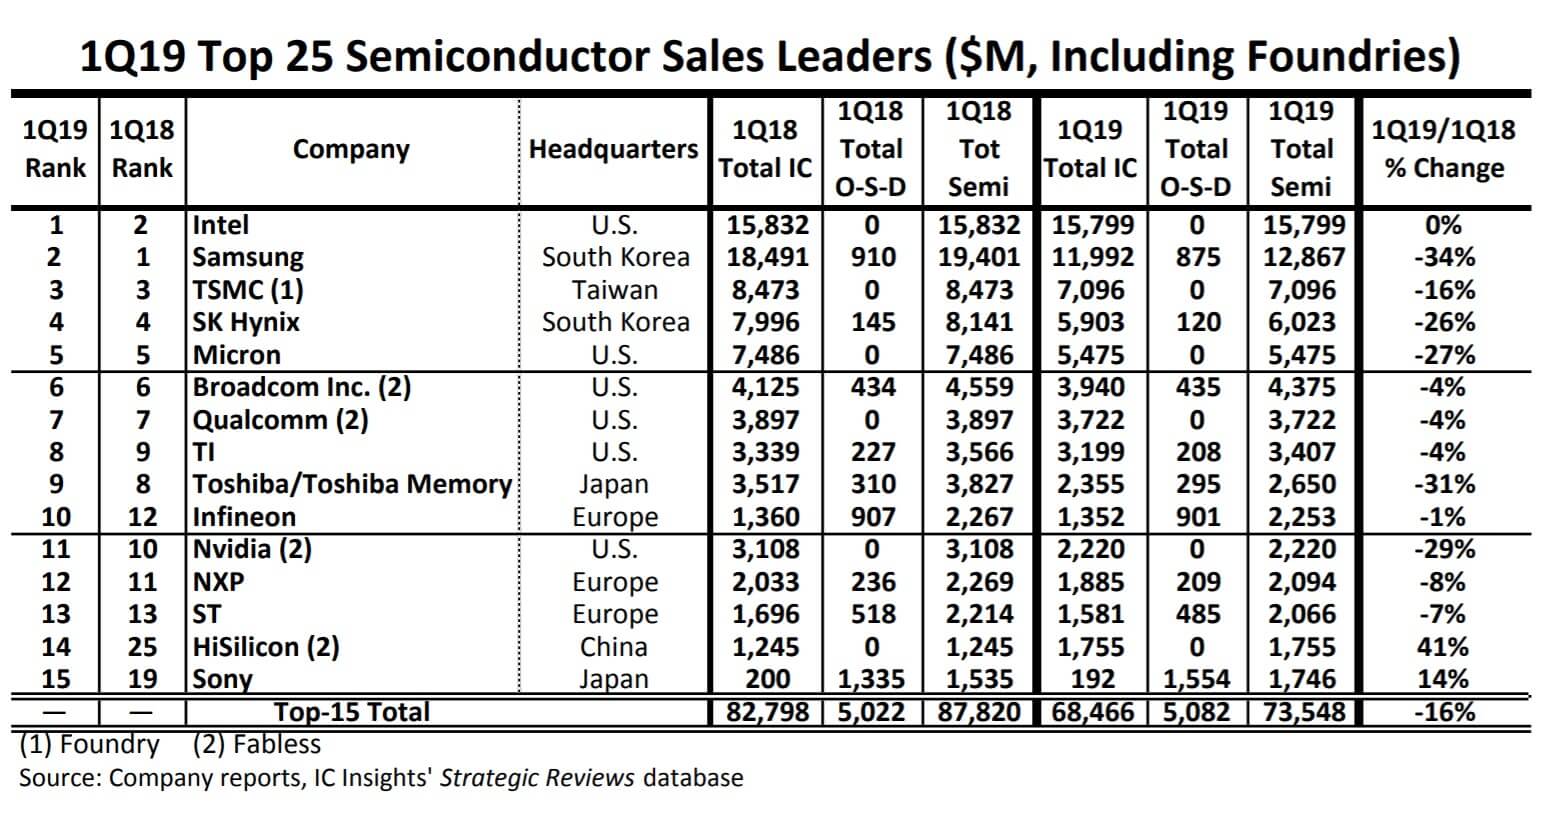 Intel regained its position as the number one in the semiconductor industry-SemiMedia